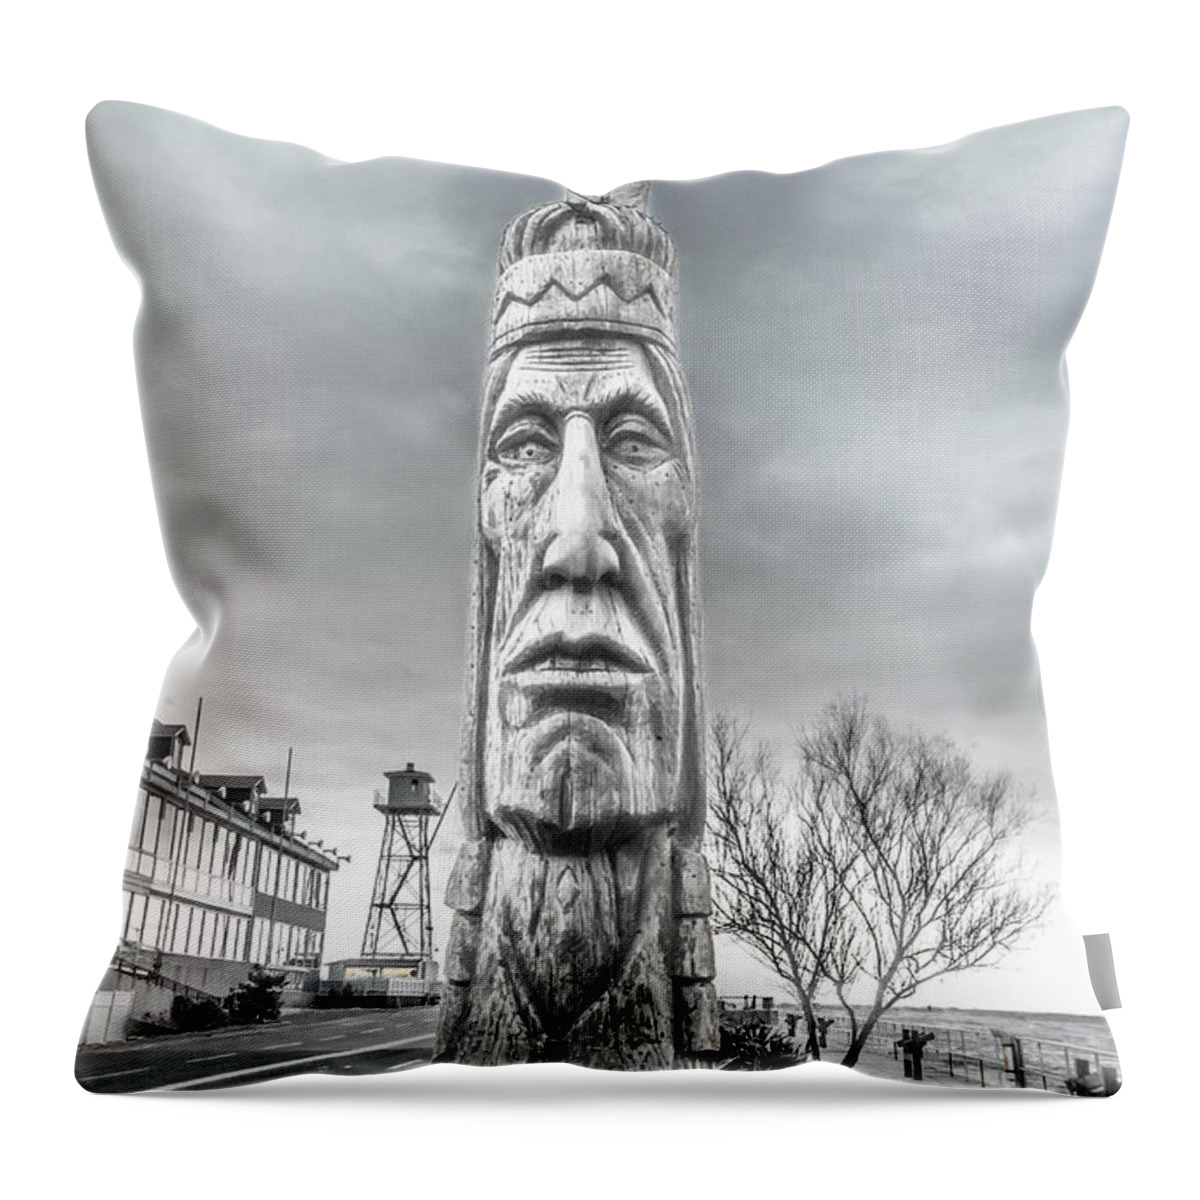 Ocean City Throw Pillow featuring the photograph Whispering Giant by Jodi Lyn Jones